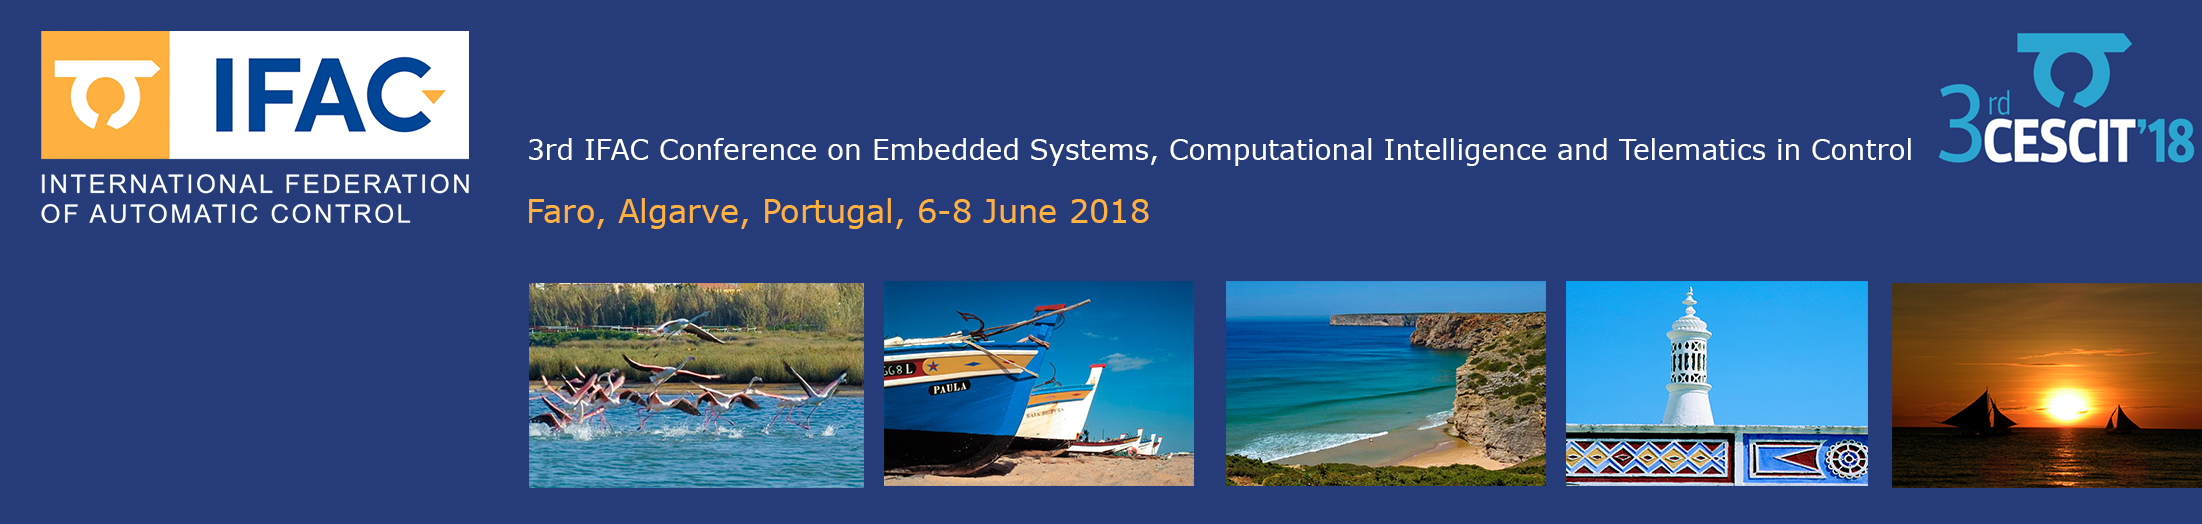 Embedded Systems, Computational Intelligence and Telematics in Control - 3rd CESCIT 2018™